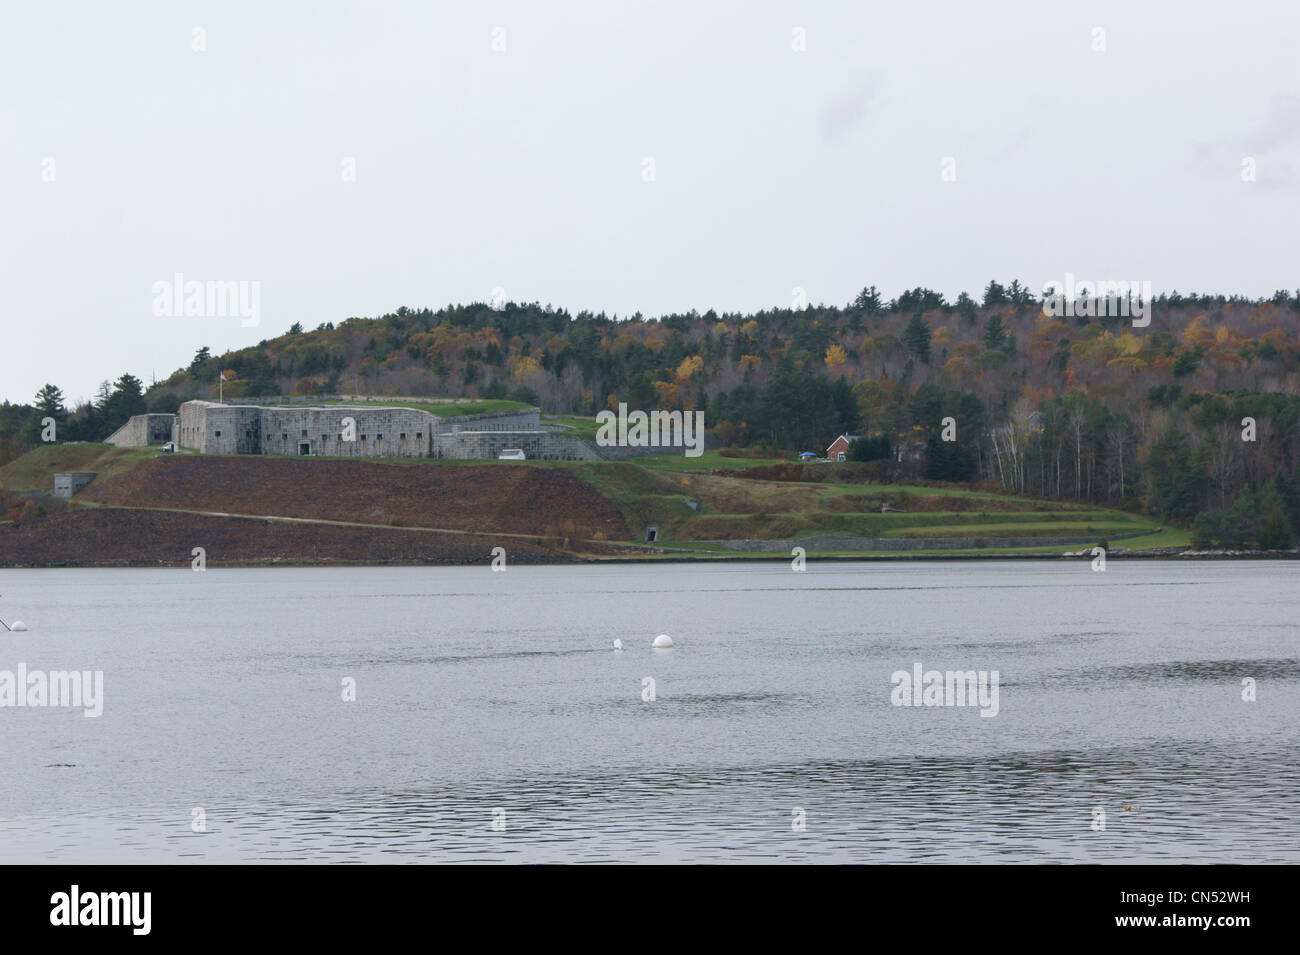 Fort Knox on the banks of the Penobscot River, Prospect, Maine. Stock Photo